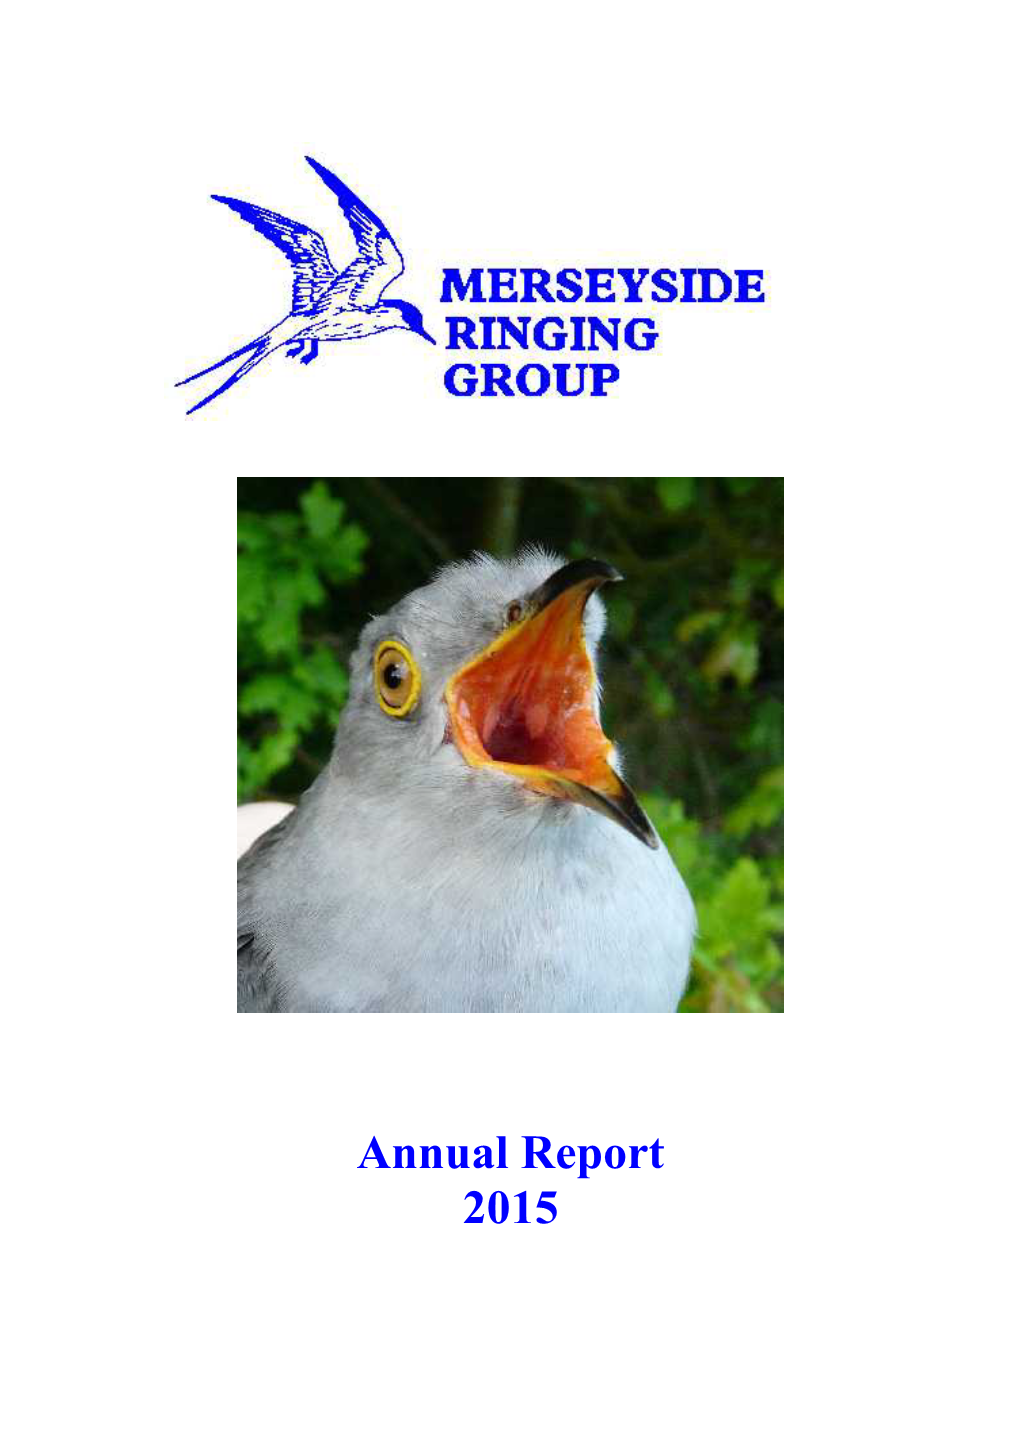 Annual Report 2015 MERSEYSIDE RINGING GROUP